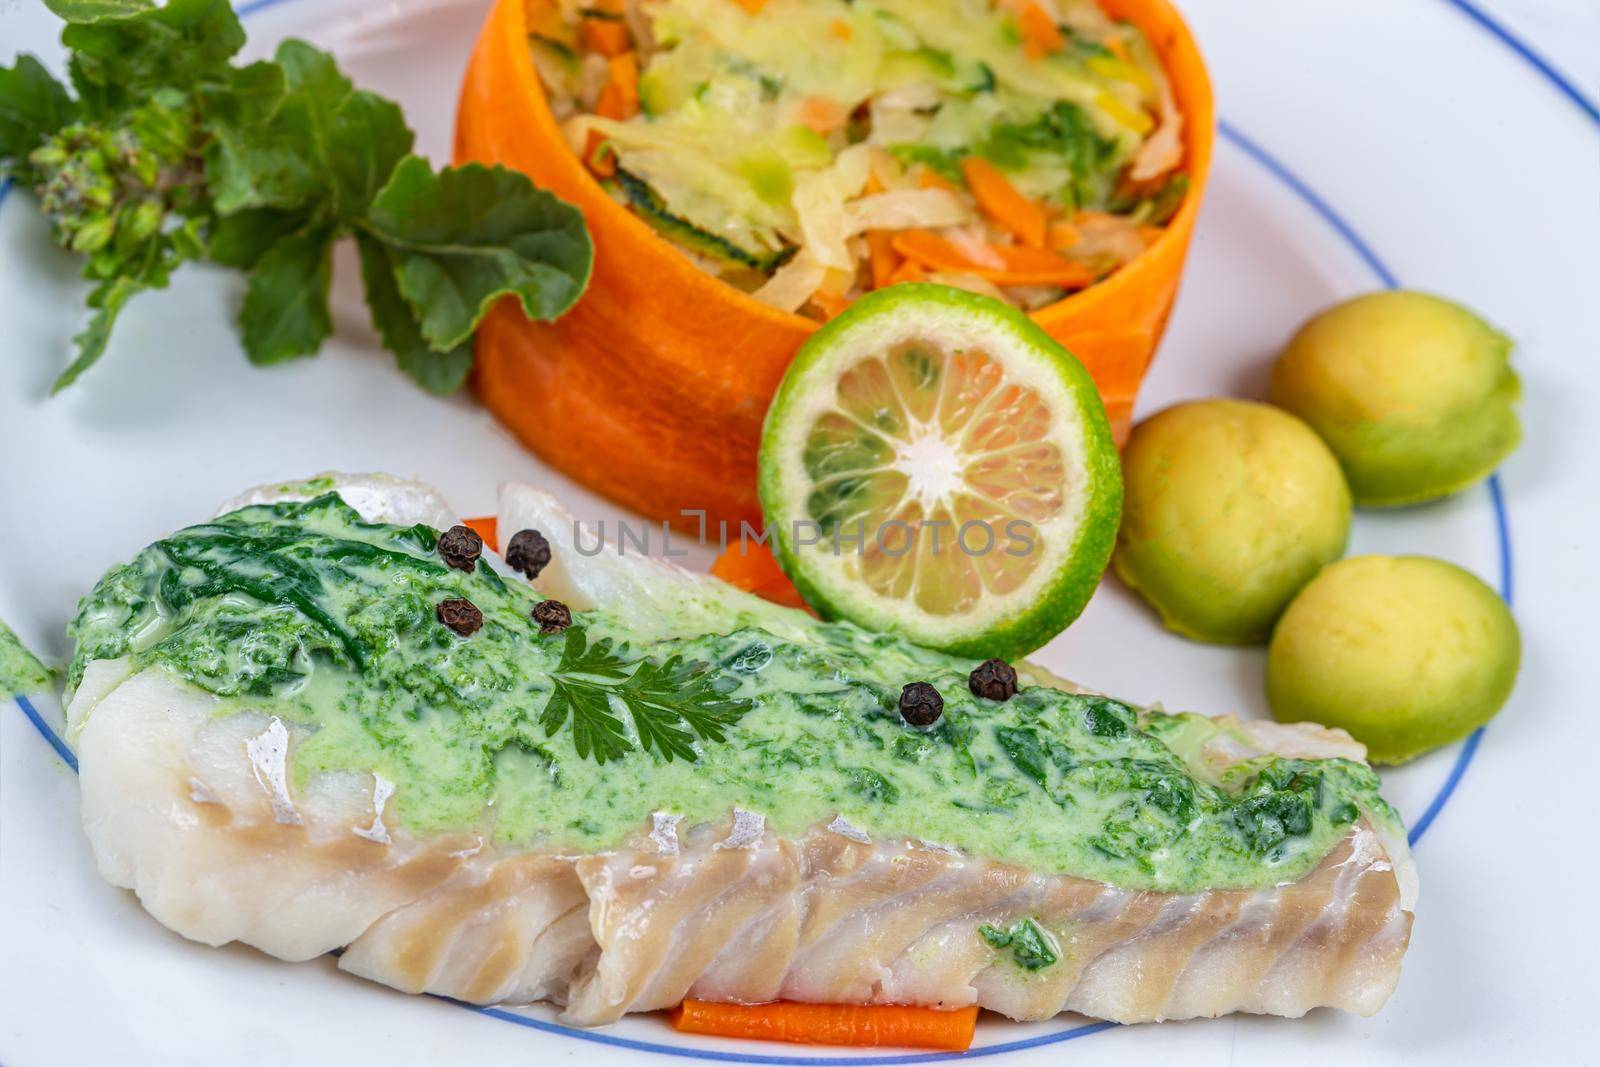 Plate of cod and vegetables with sorrel sauce by JPC-PROD